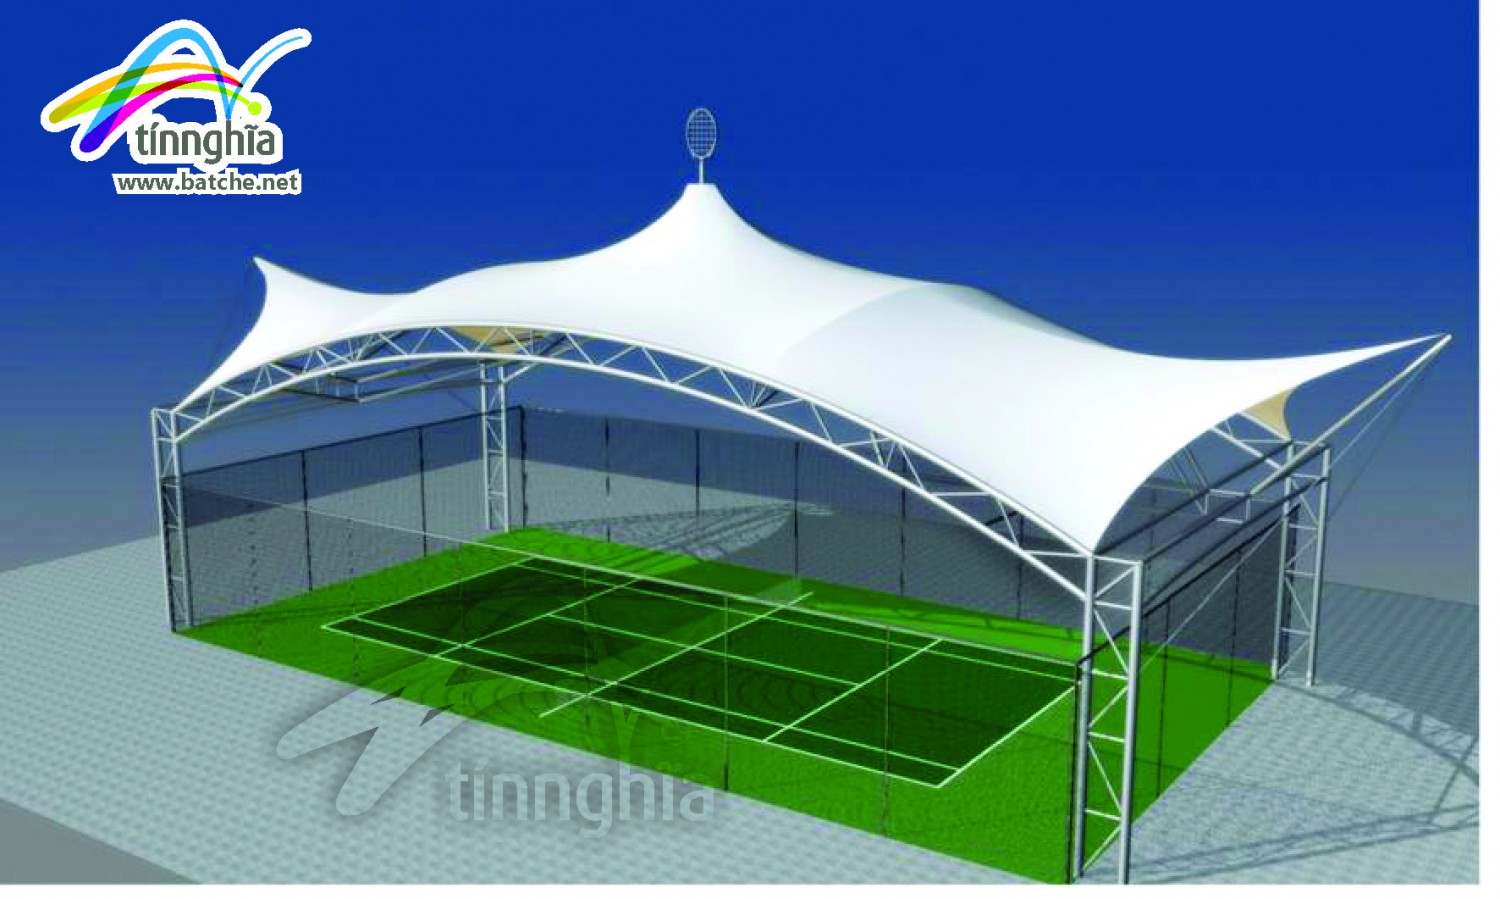 Shade Sails for Tennis Court